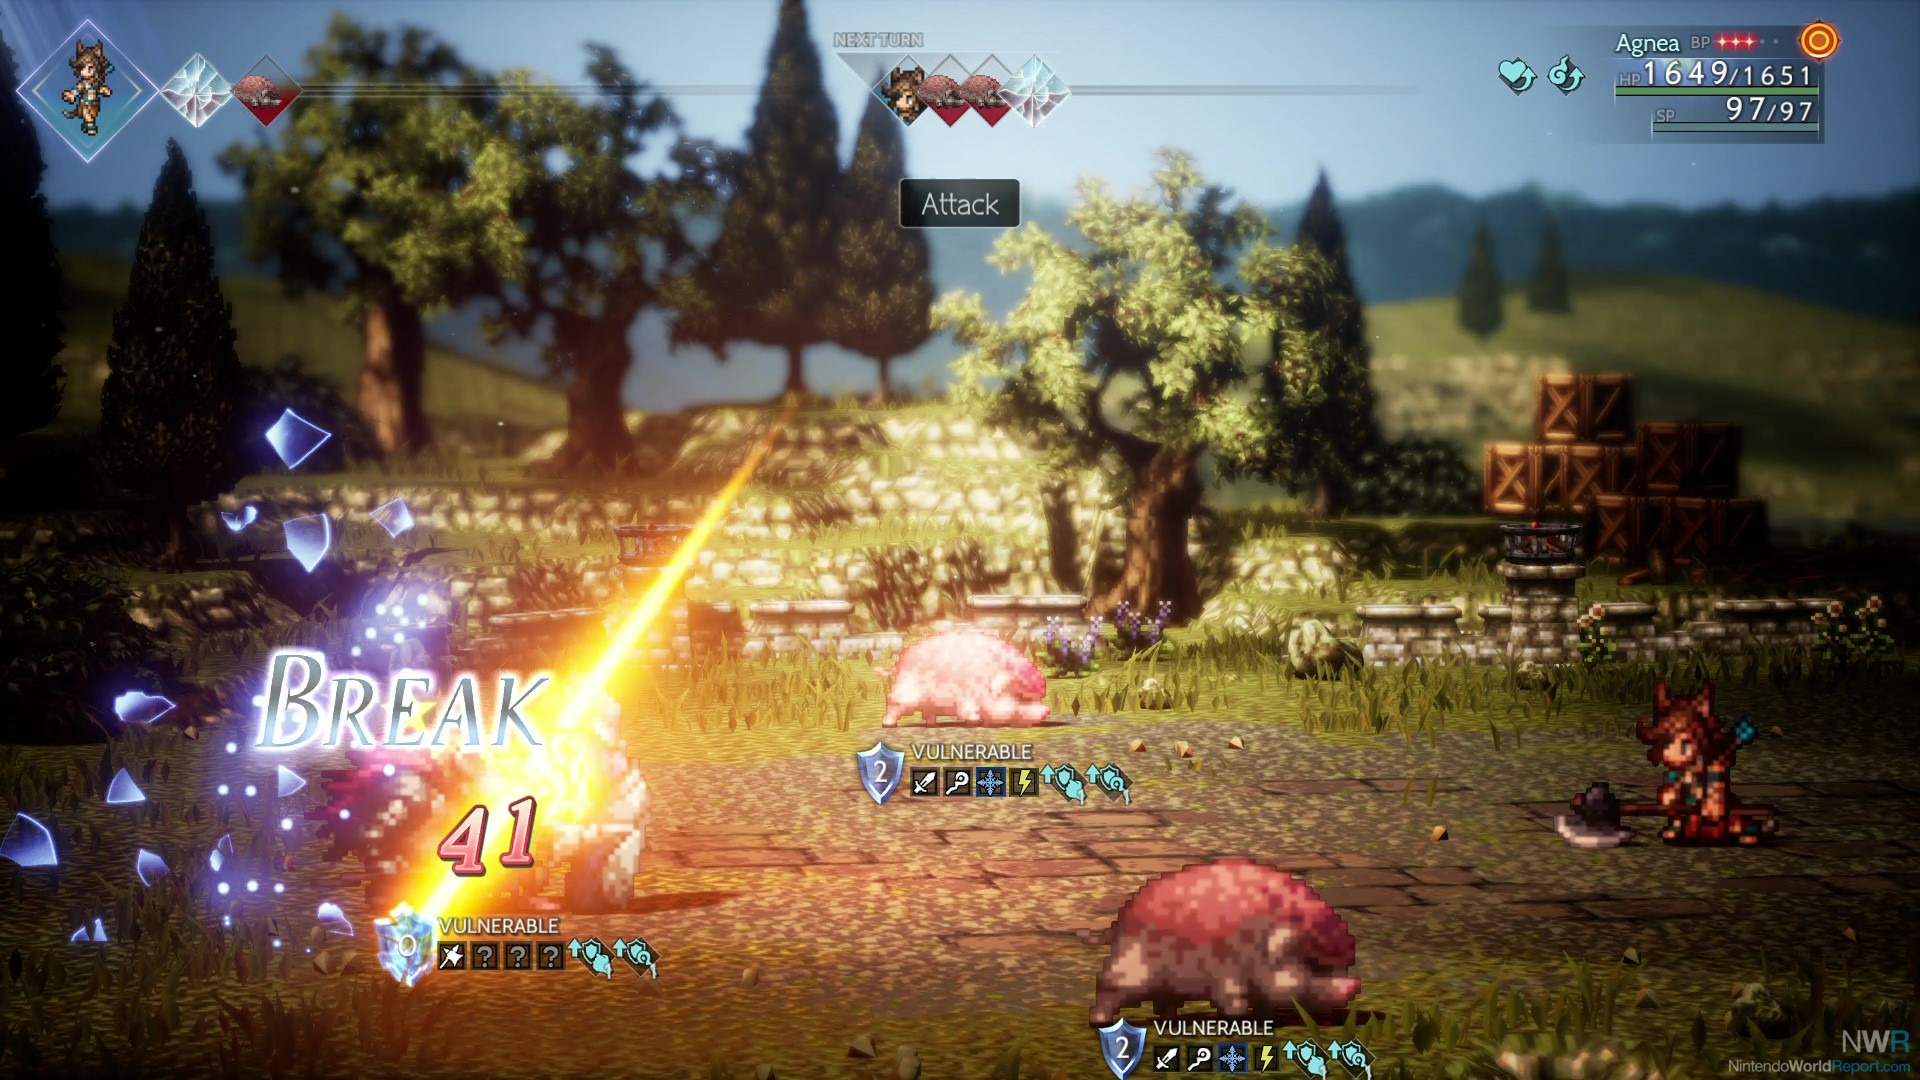 Octopath Traveler II Hands-on - Report World Preview - Nintendo Hands-on Preview